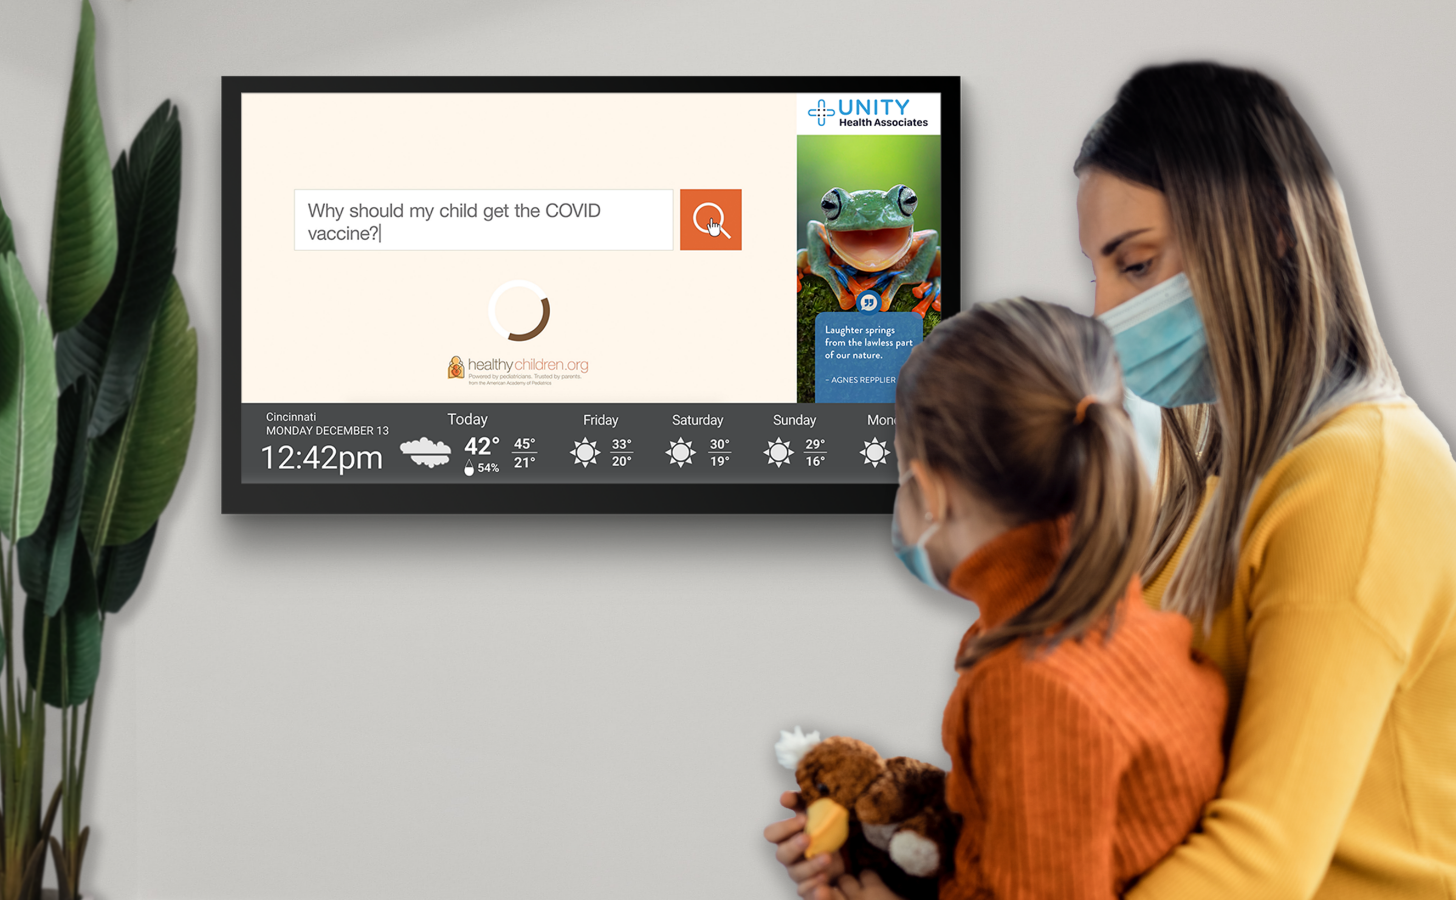 A young child and mother sit in a doctor's office wearing masks looking at a screen on the wall with information about the COVID-19 vaccine for children